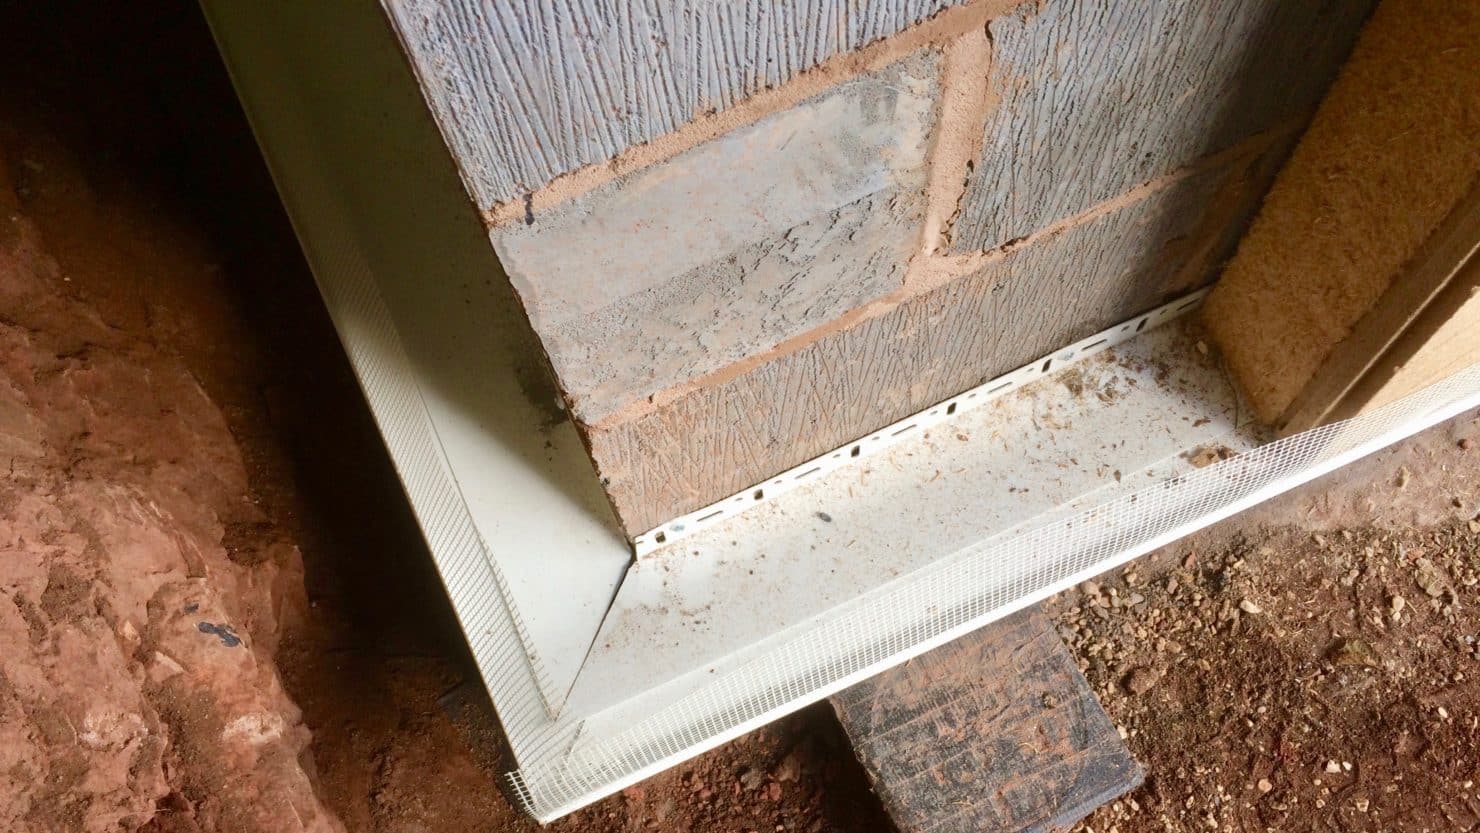 Material in action.

Here you can see the UdiBASE variable base profiles being used with the UdiRECO wood fibre insulation. This allows the UdiRECO to be installed, tightened and levelled and then have the outer drip section pushed firmly up against the face of the boards.